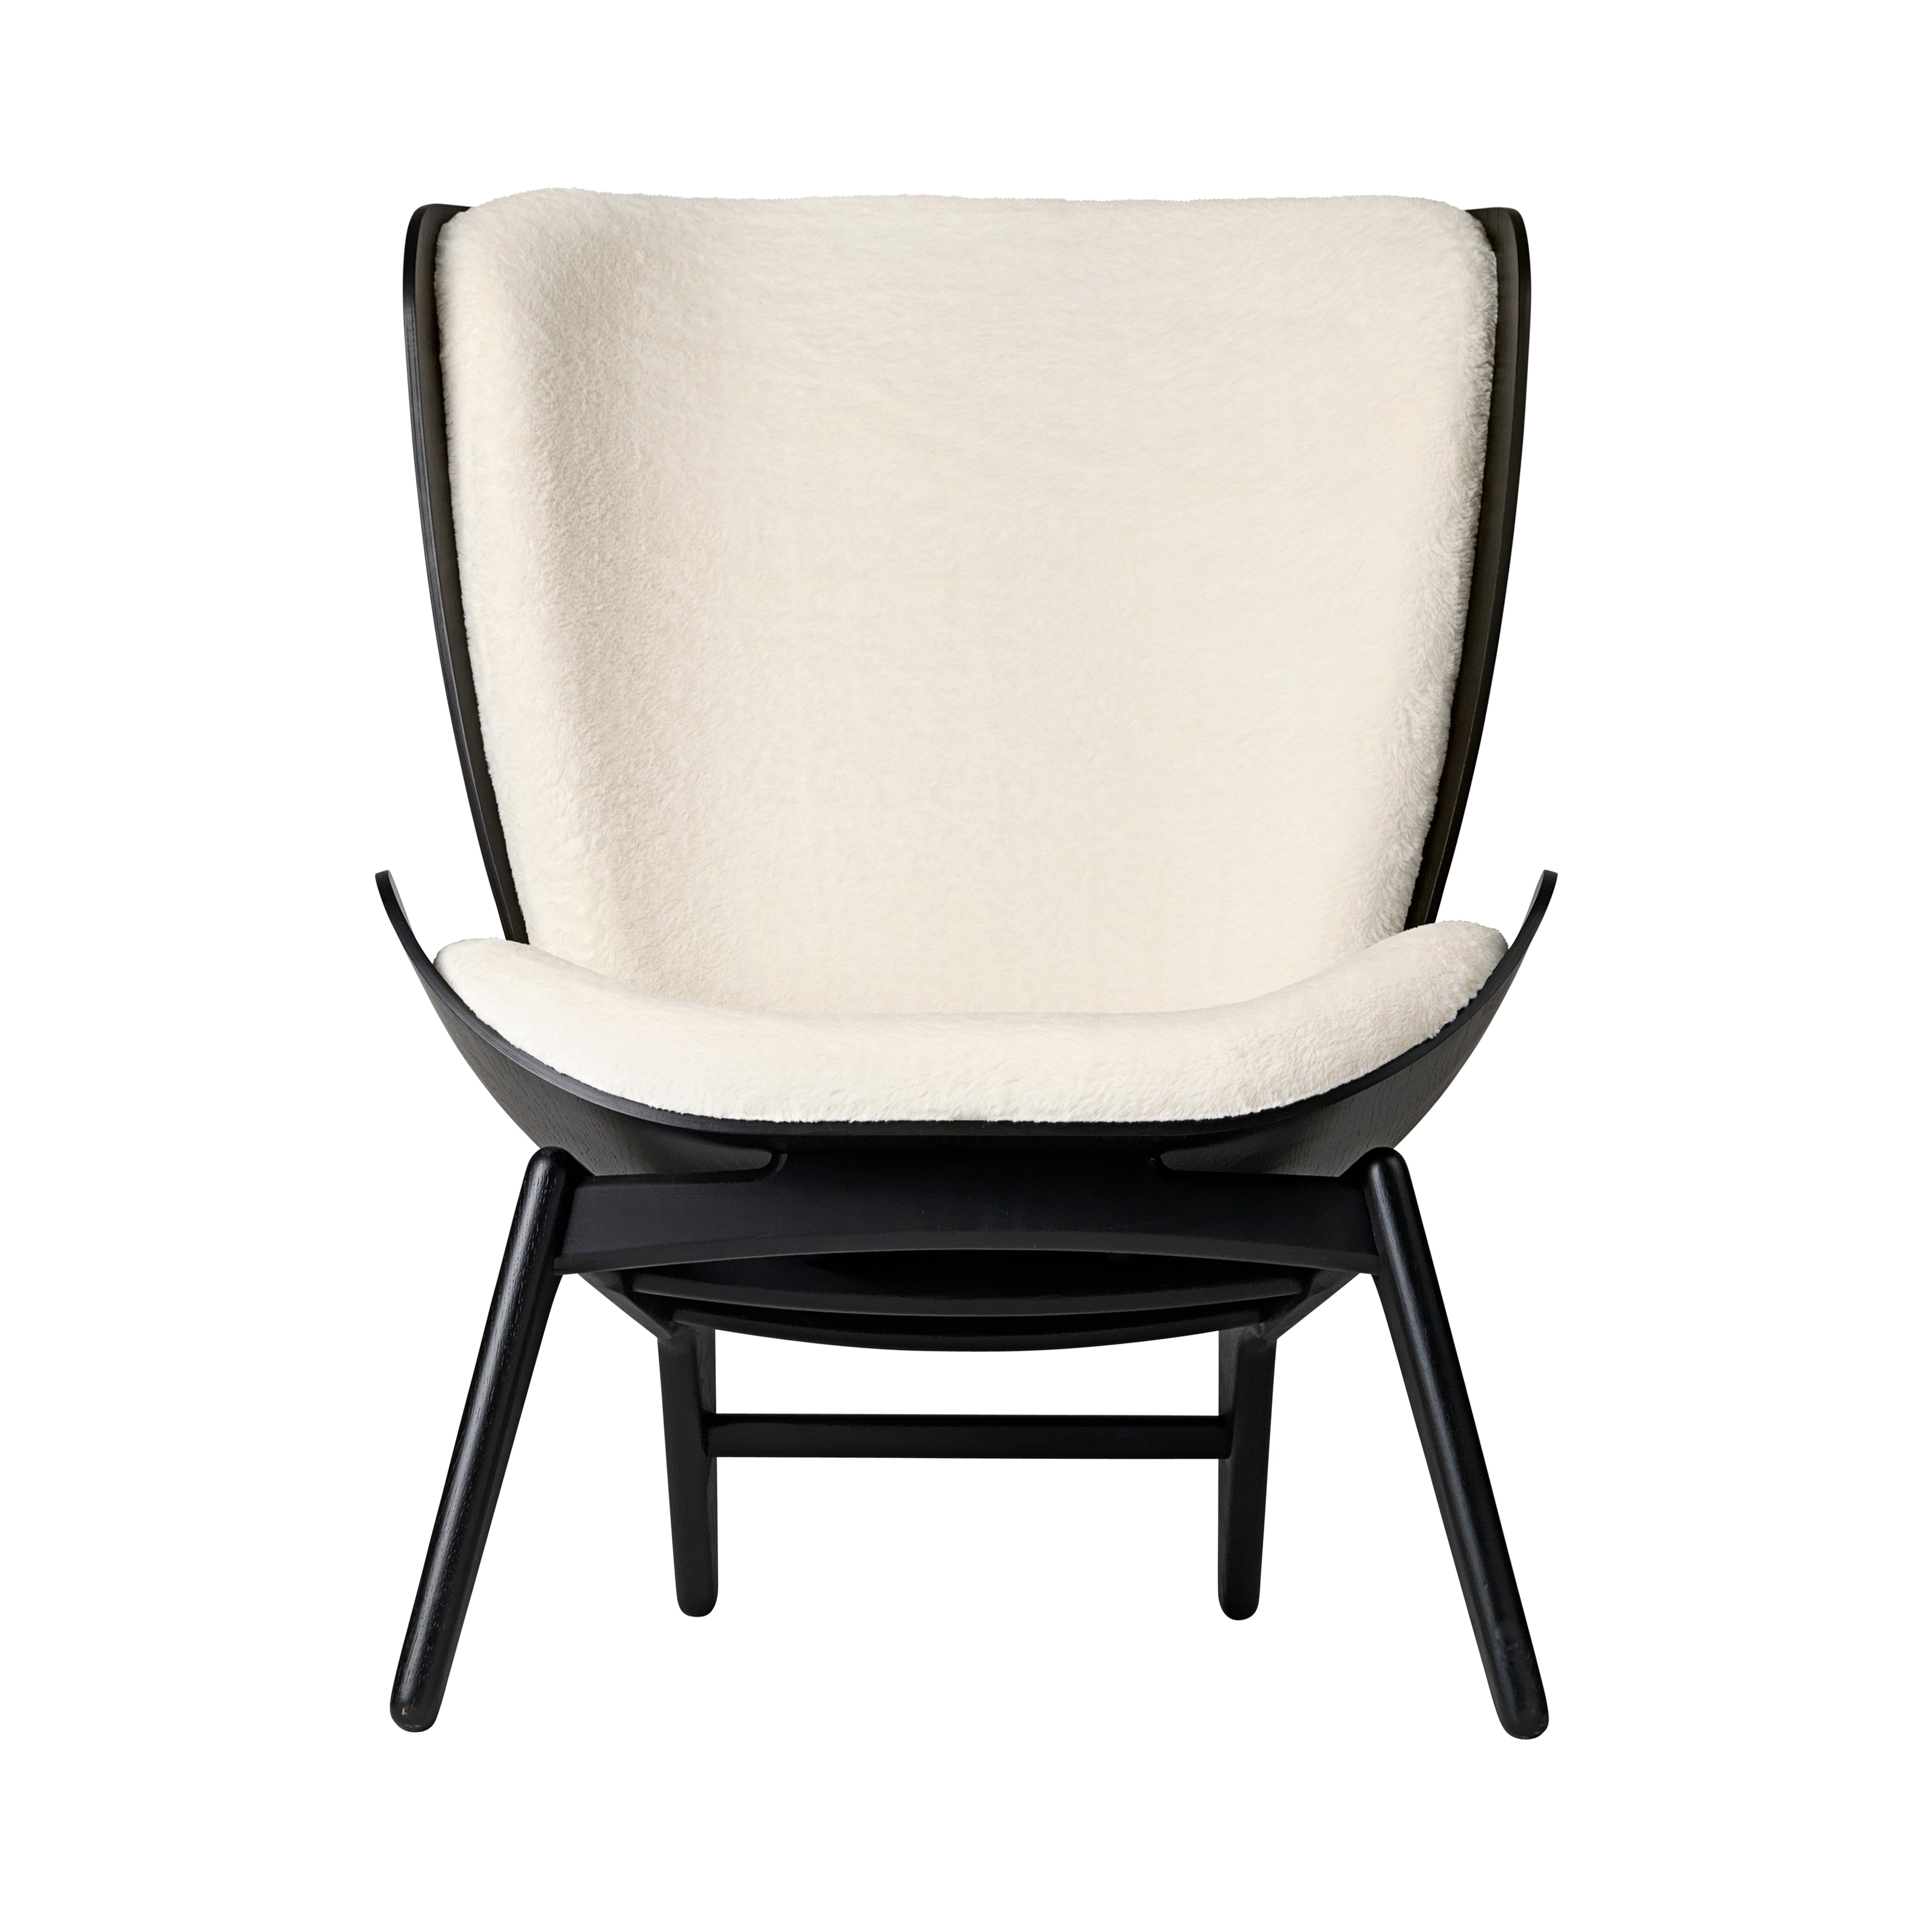 The Reader Wing chair: Black Oak + Teddy White